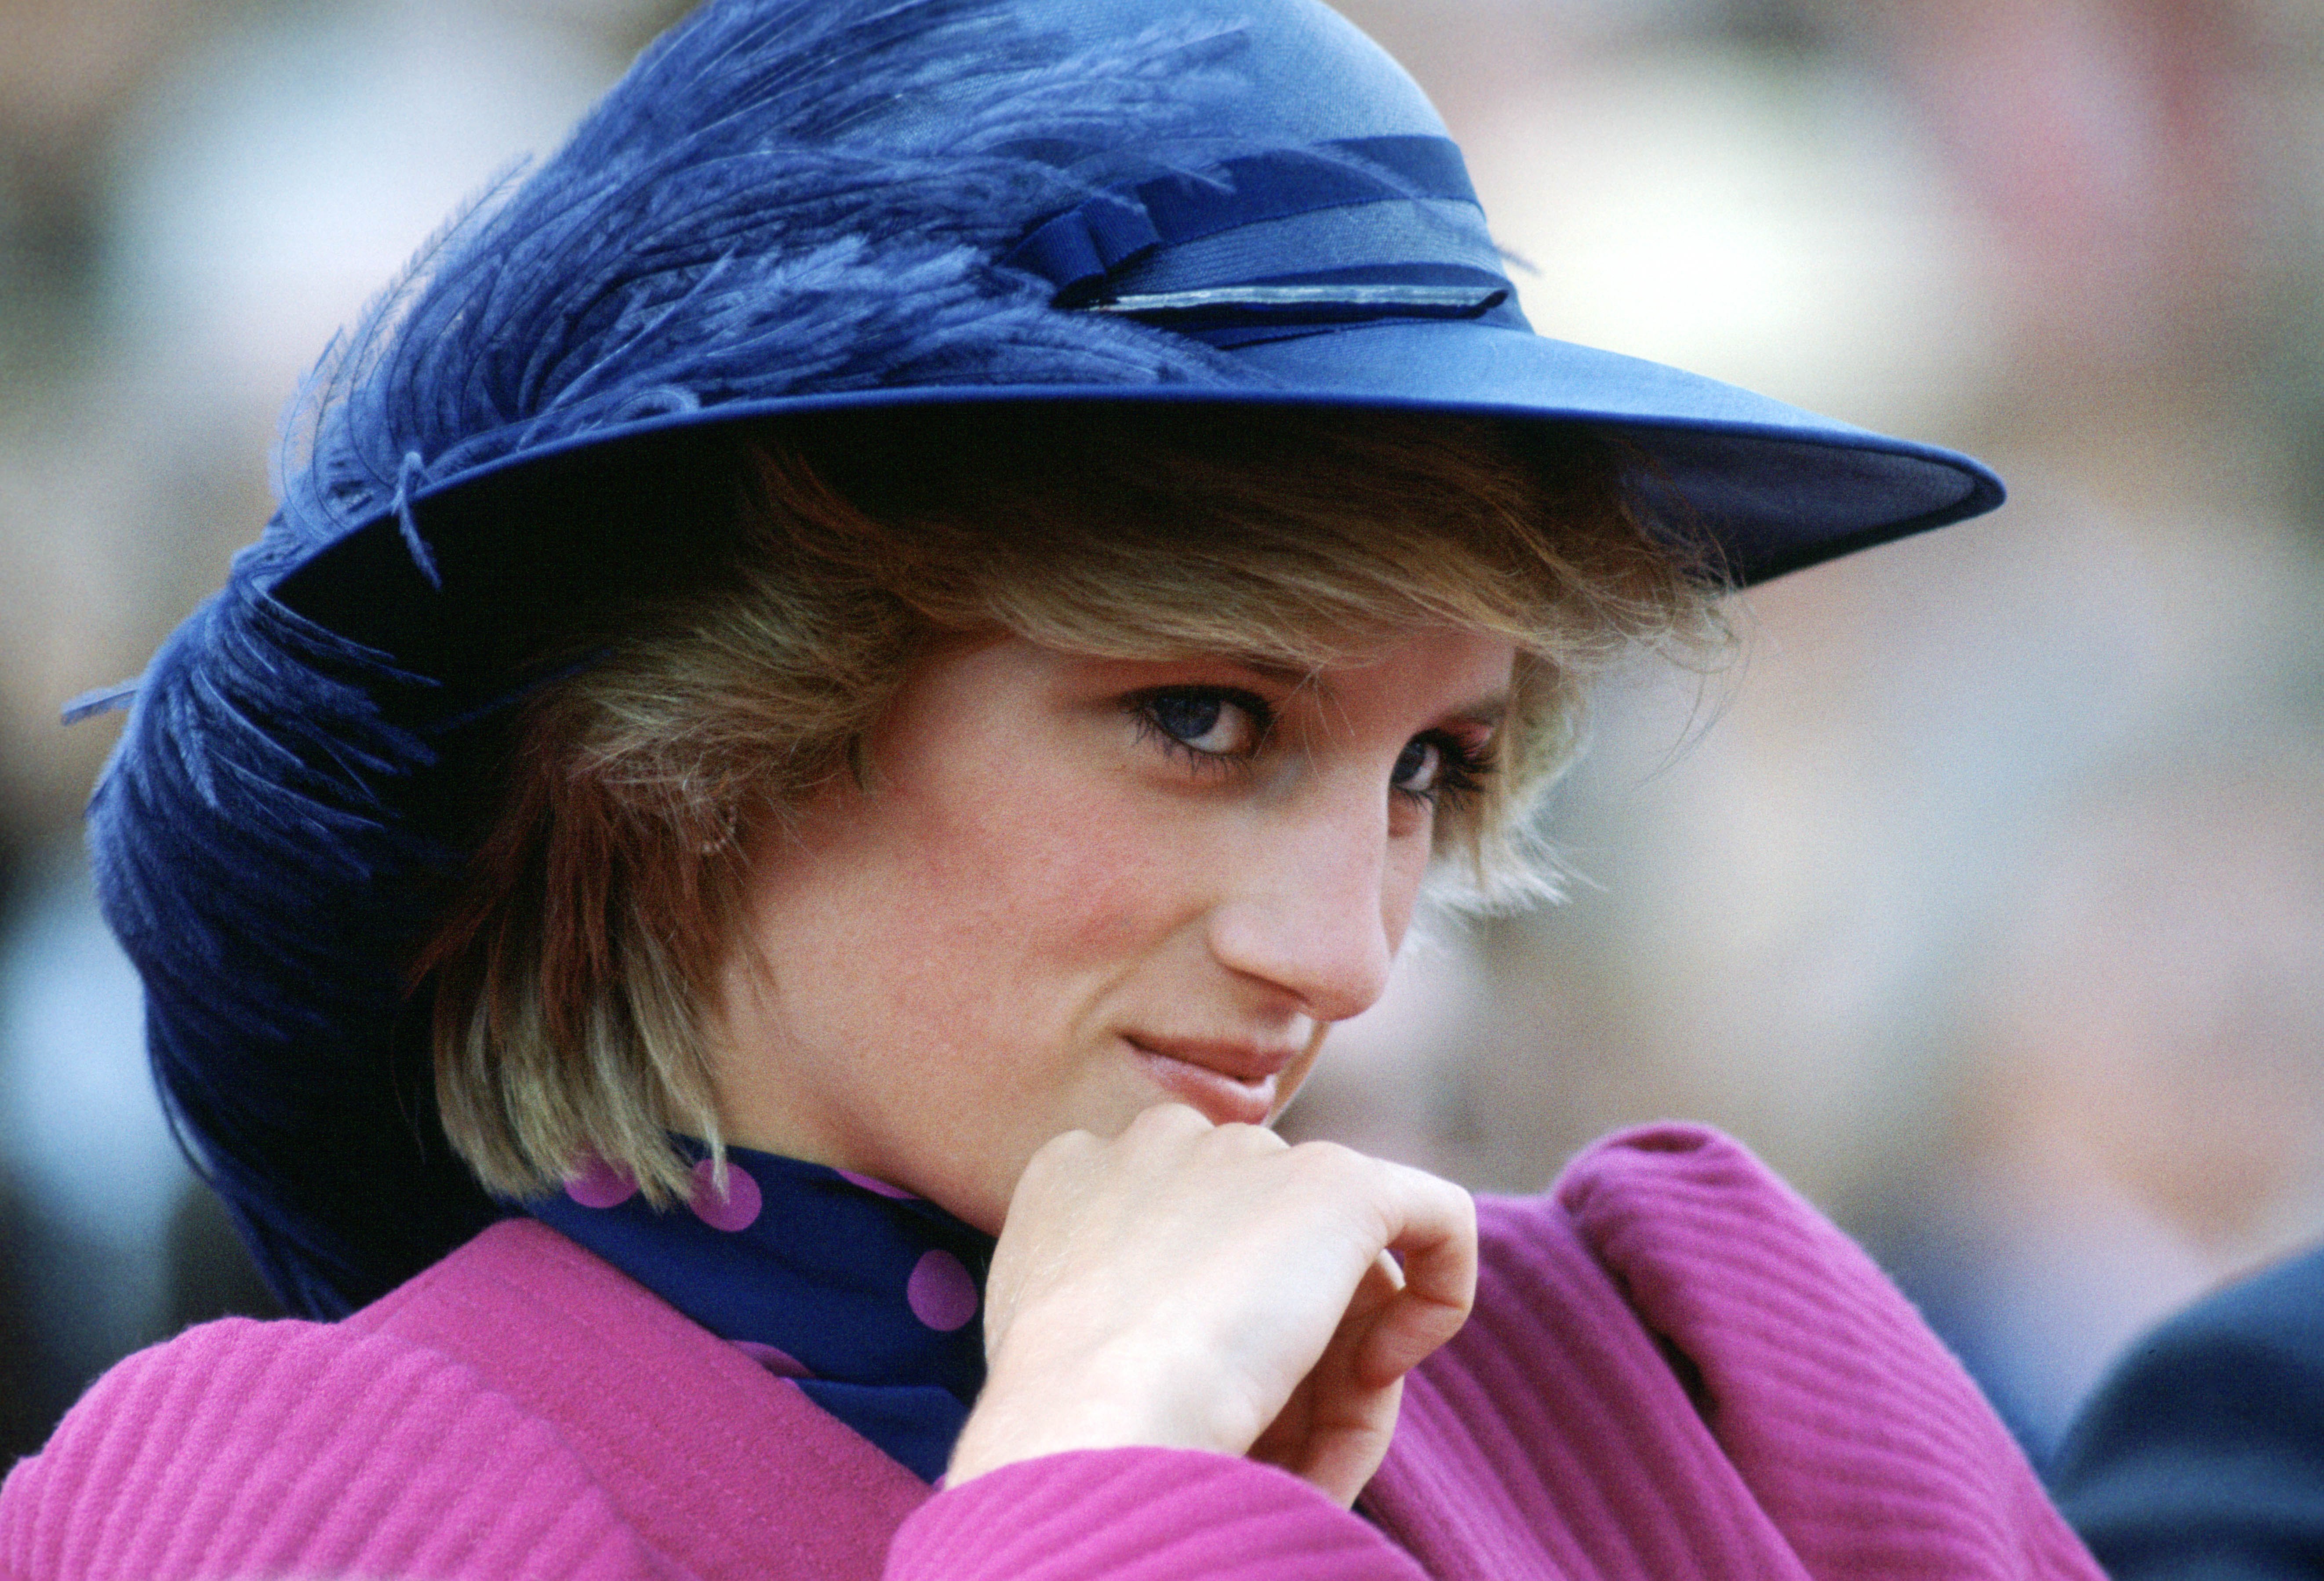 Princess Diana wearing a feathered blue hat and holding her hand up to her chin